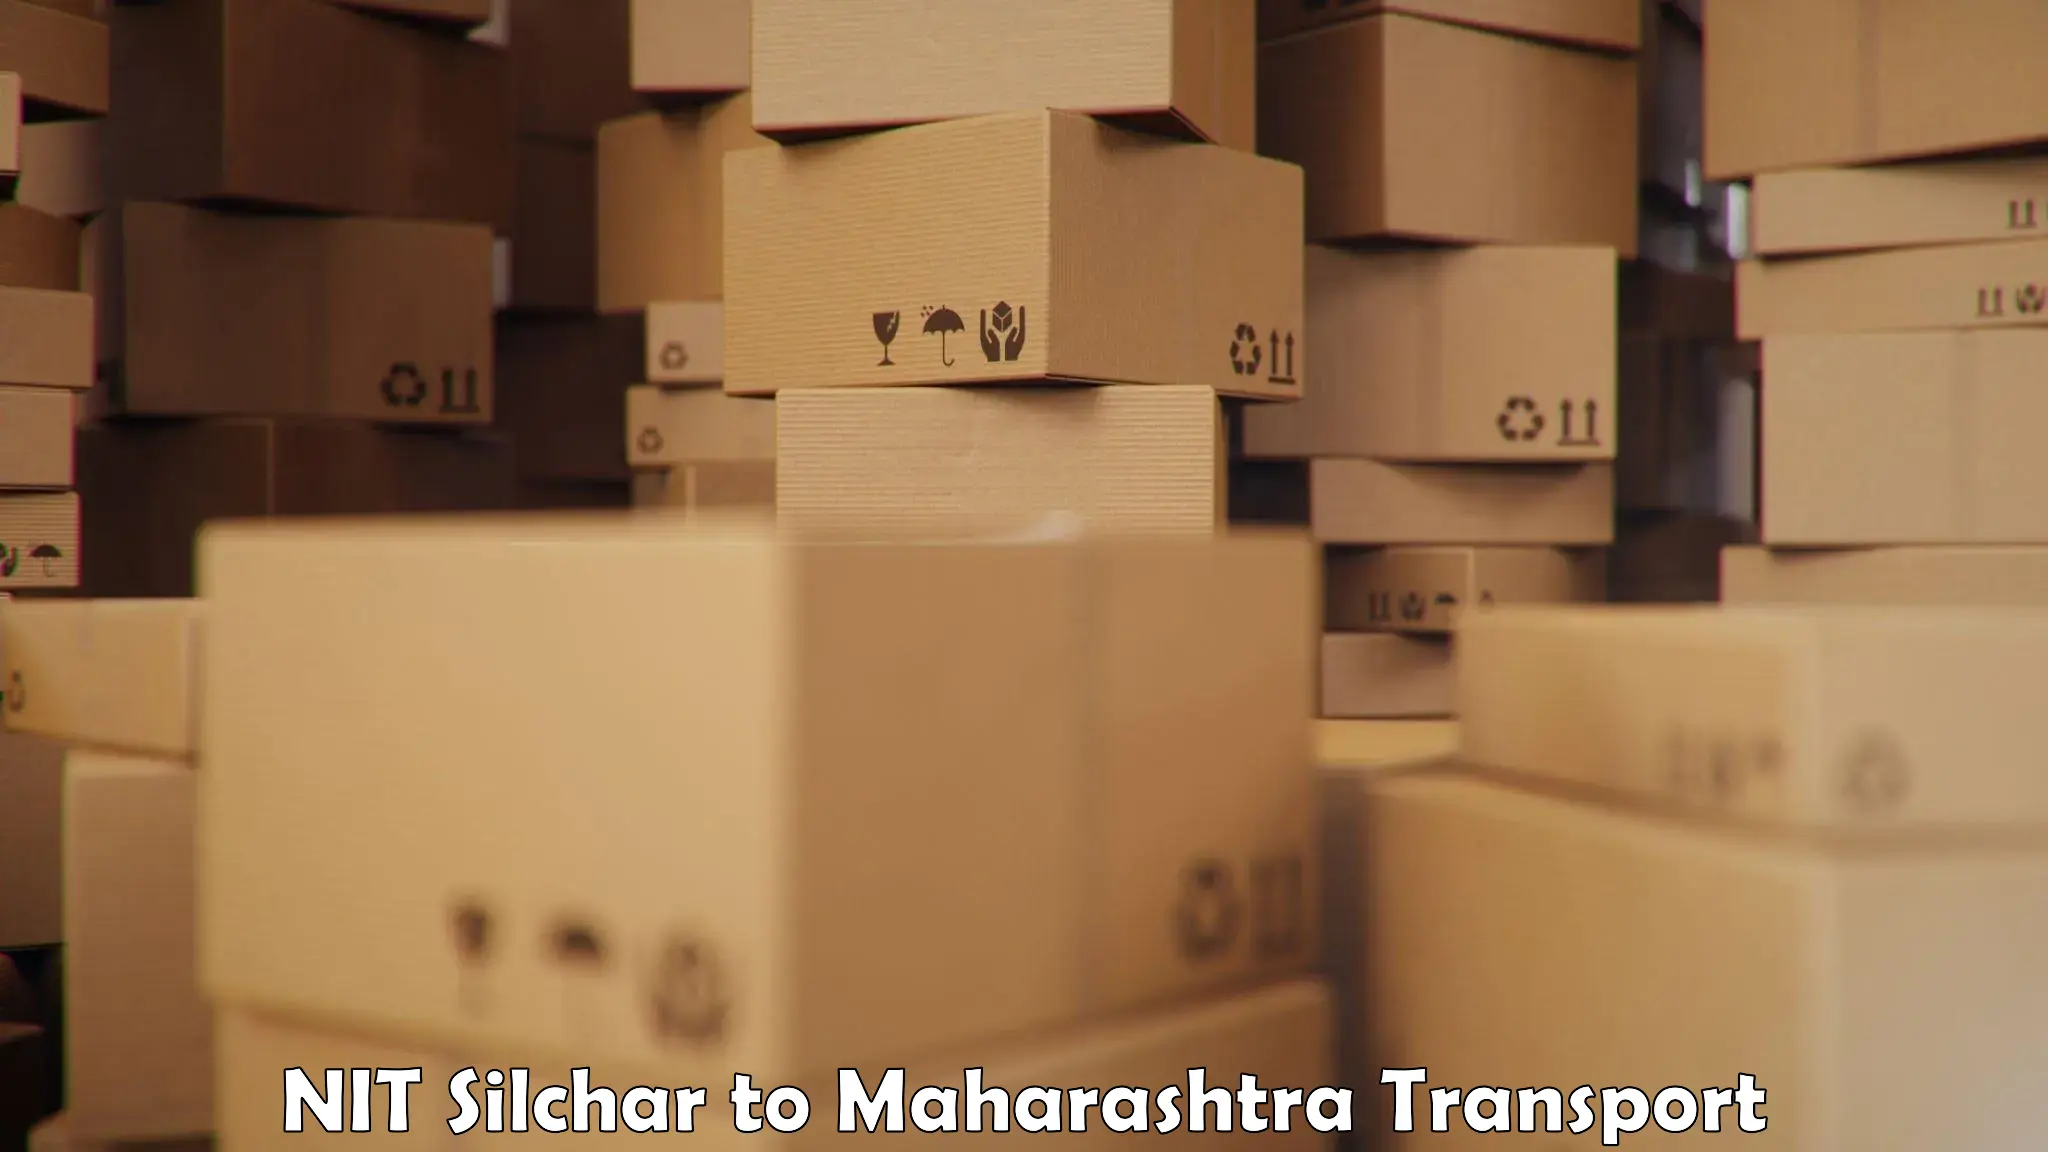 Truck transport companies in India NIT Silchar to Nira